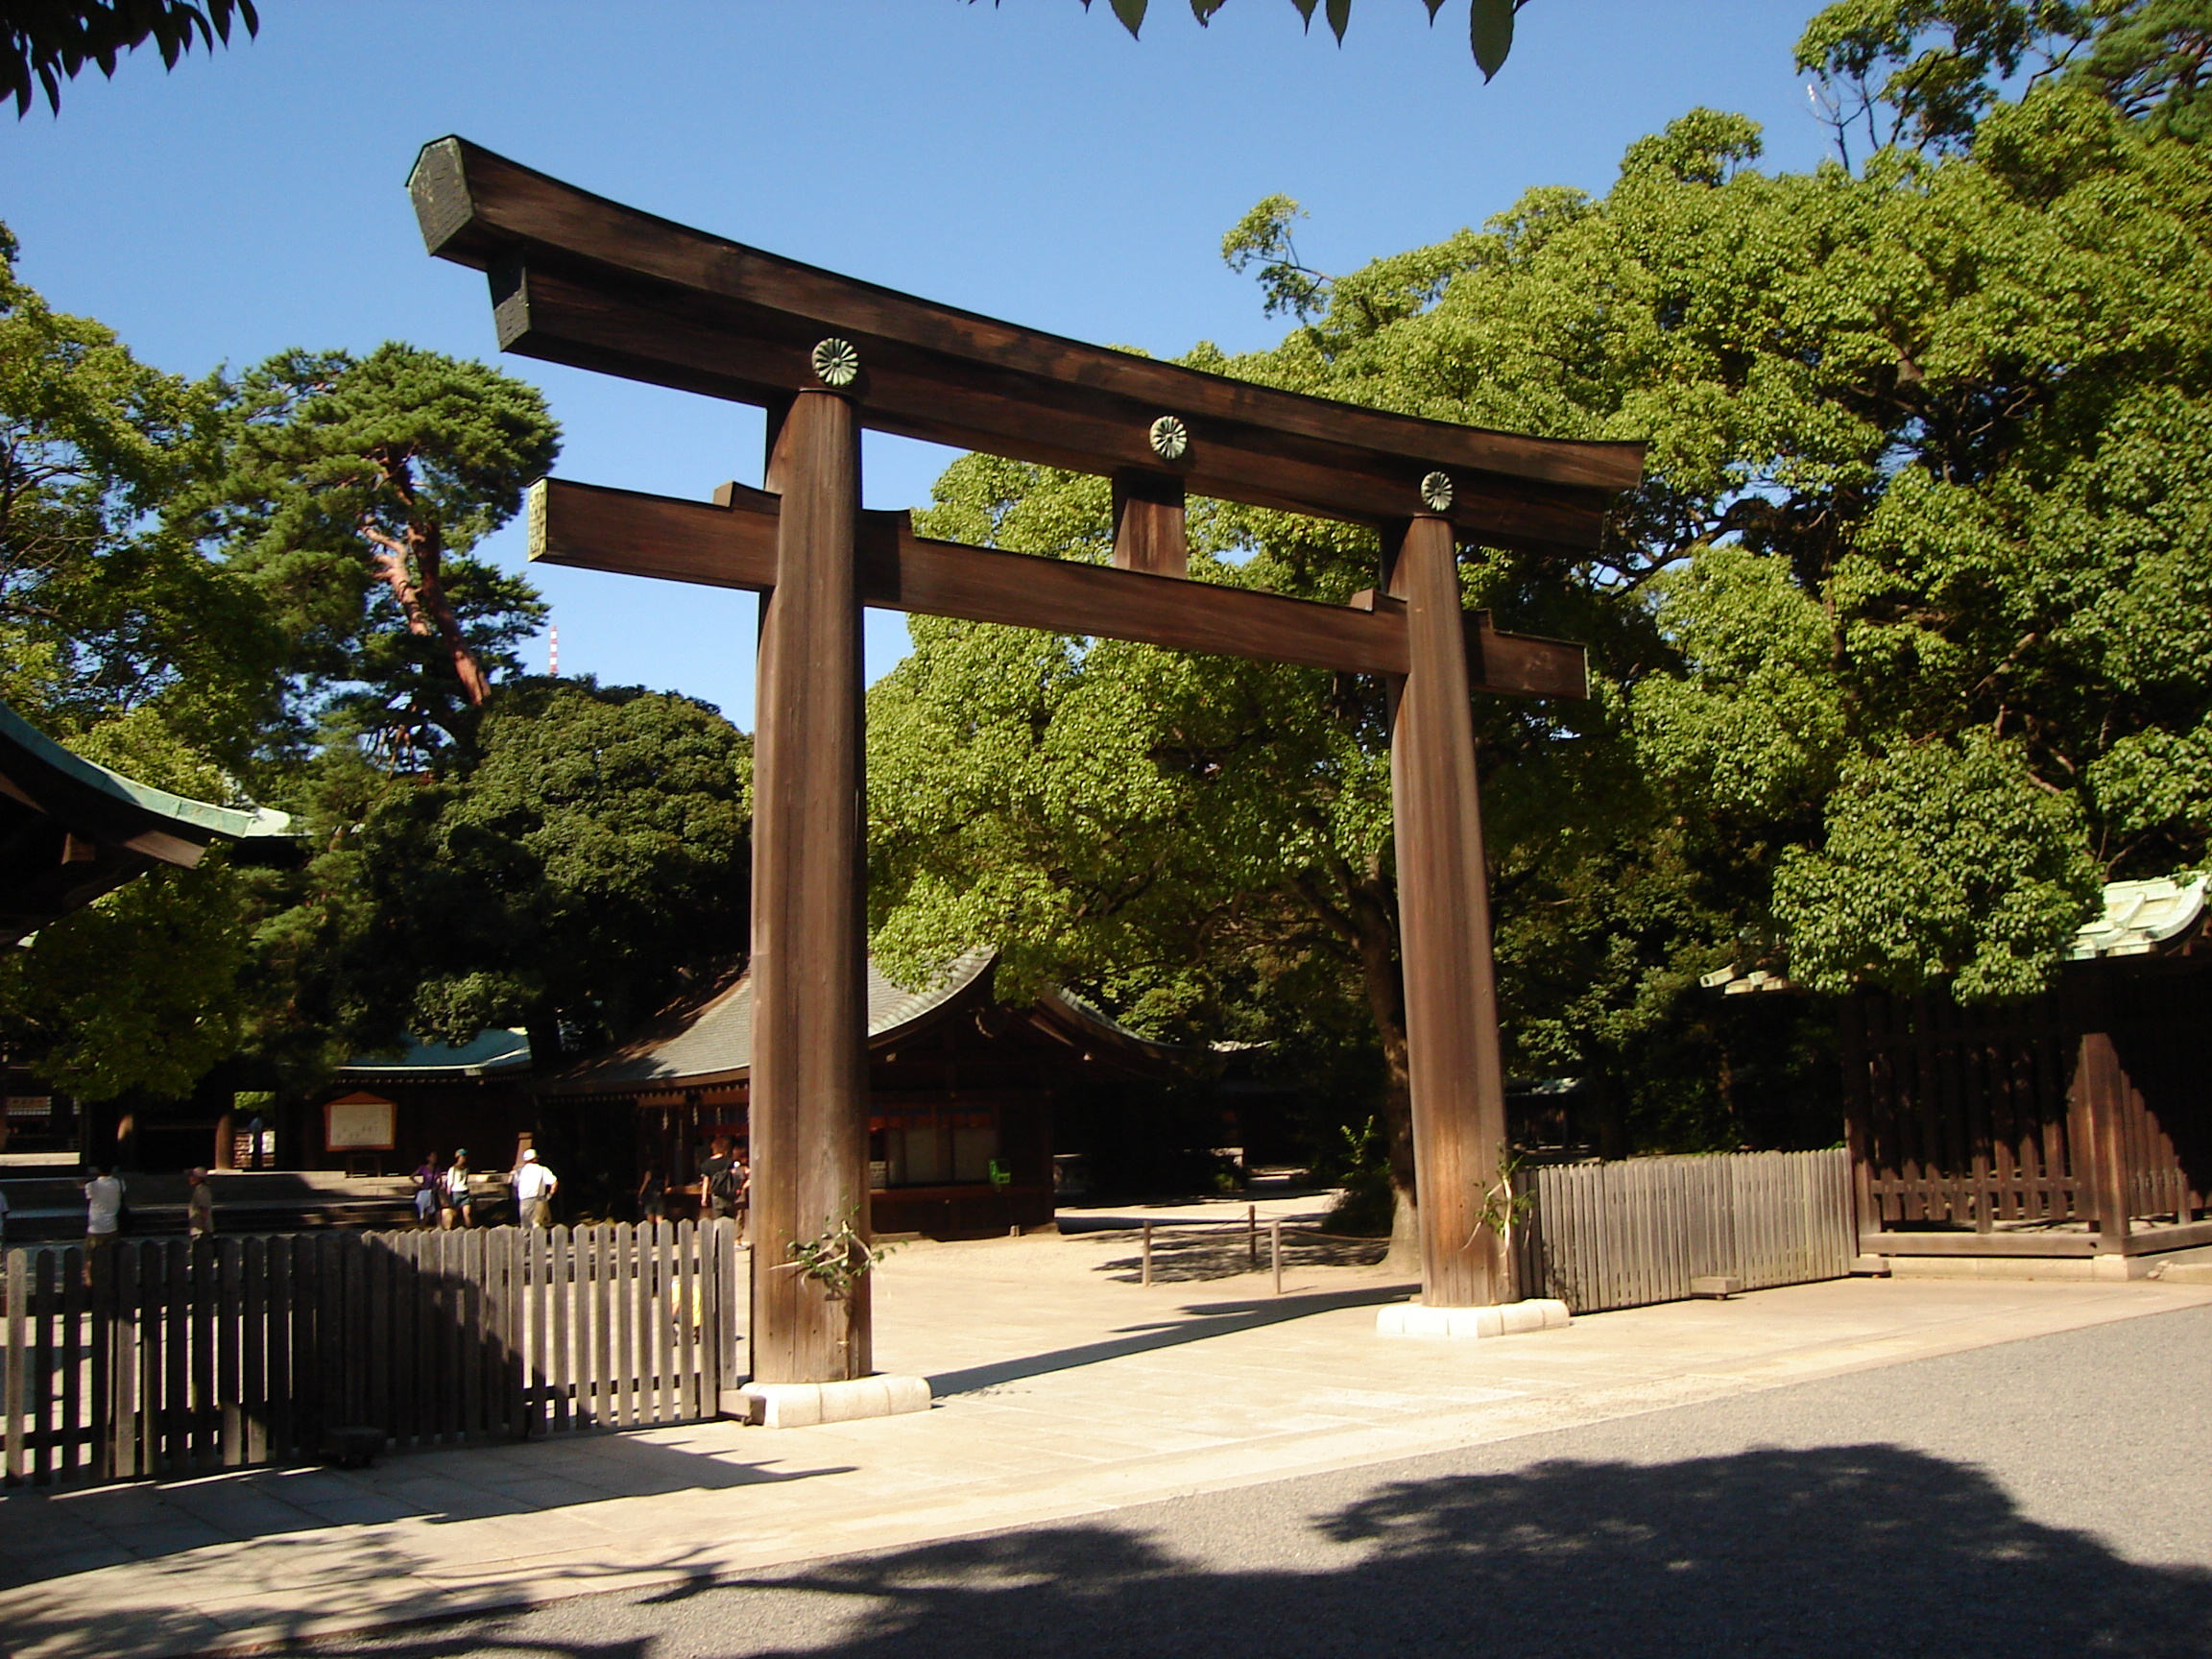 a large wooden torii gate serves as an entrance to a fenced area